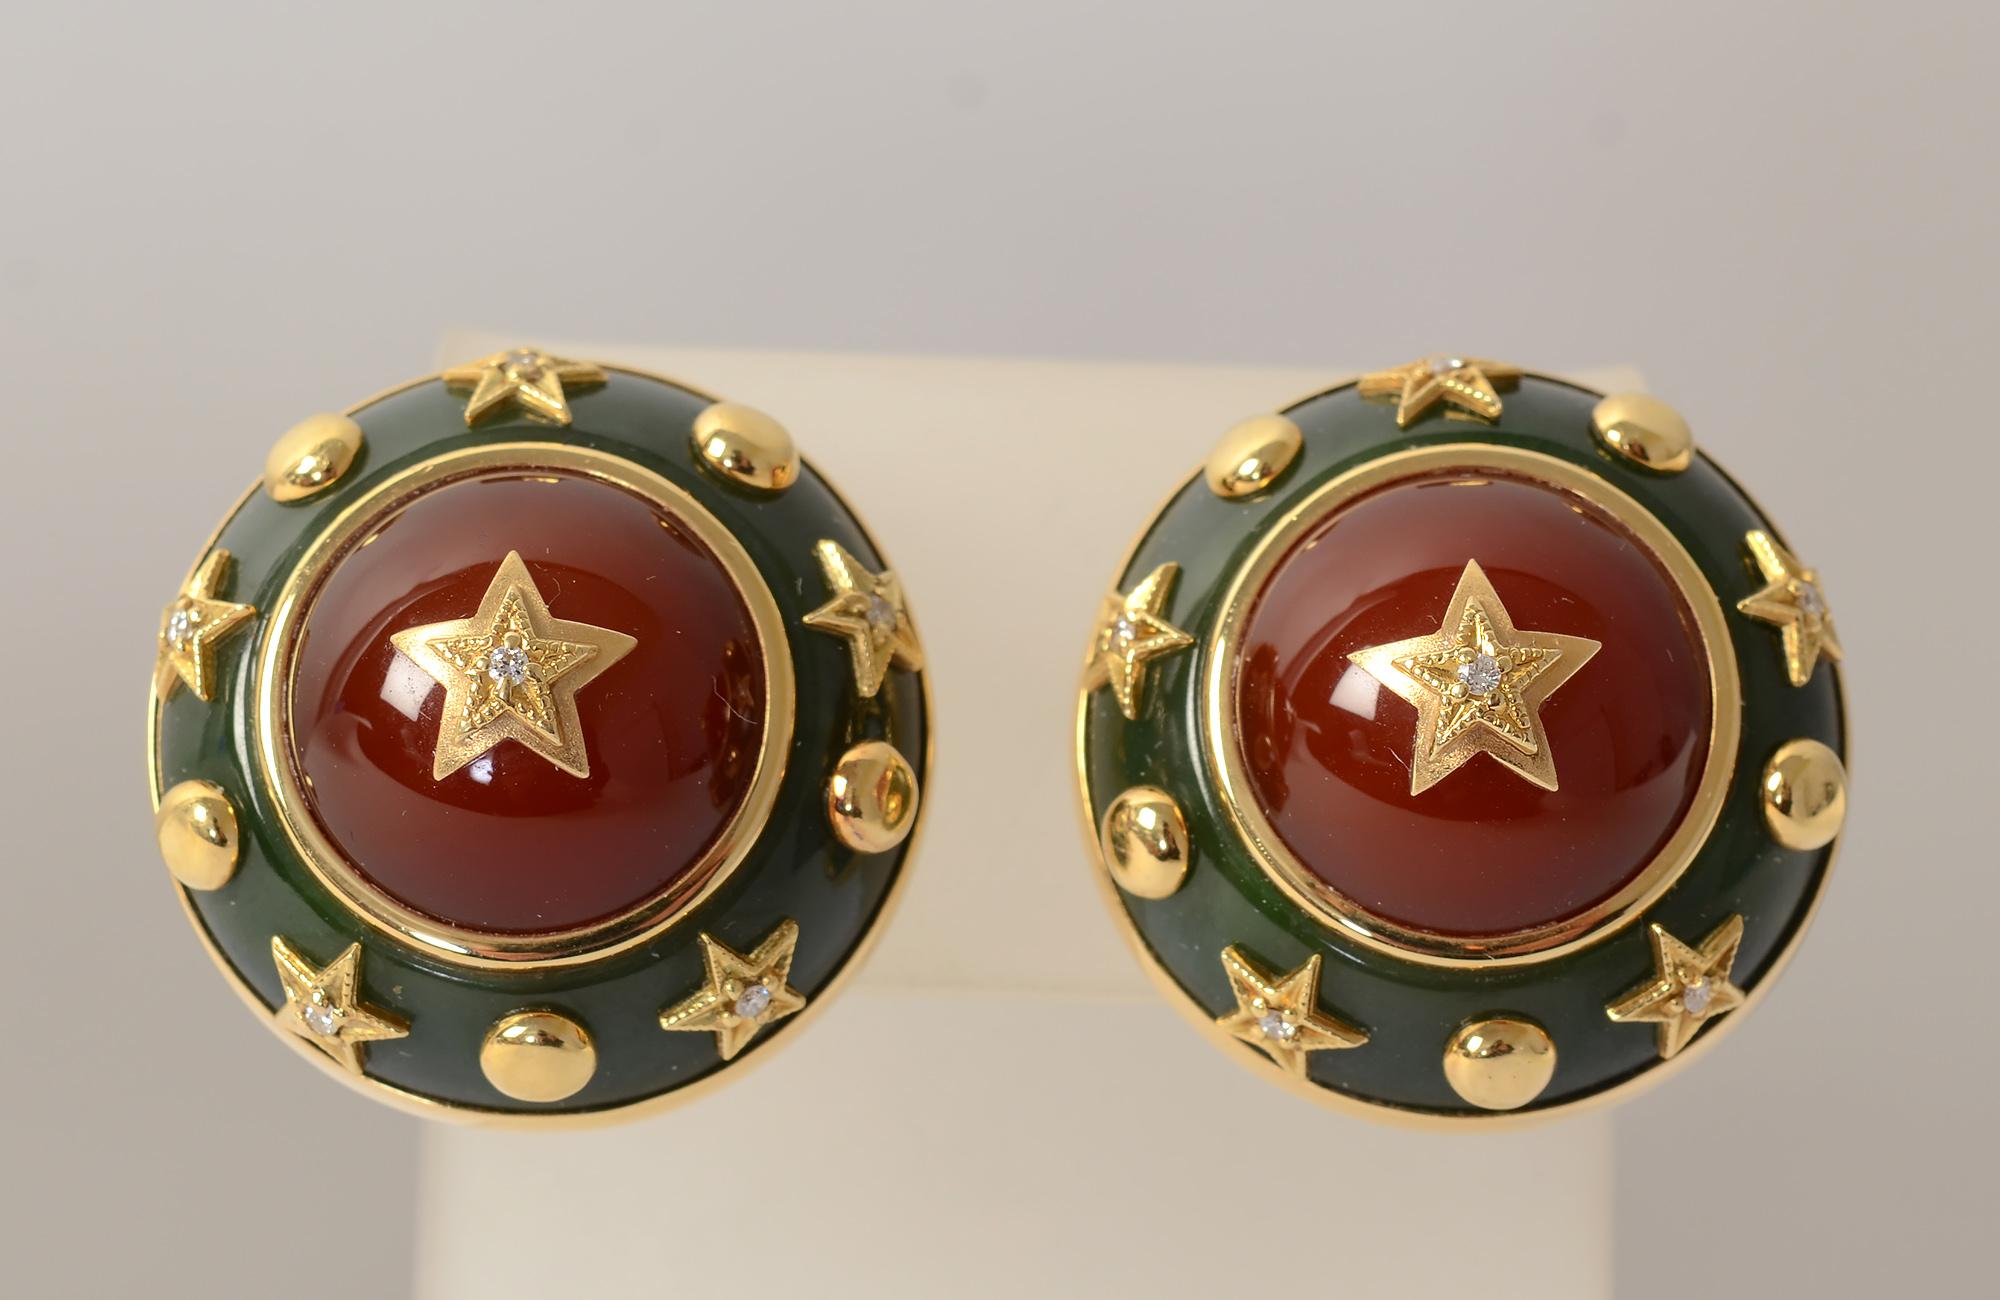 Sporty and sophisticated domed earrings by Trianon. A gold star with a diamond is in the middle of a cabochon carnelian. It is surrounded by a band of aventurine that alternates the same stars with gold dots. The earrings are 
1 1/4 inches in